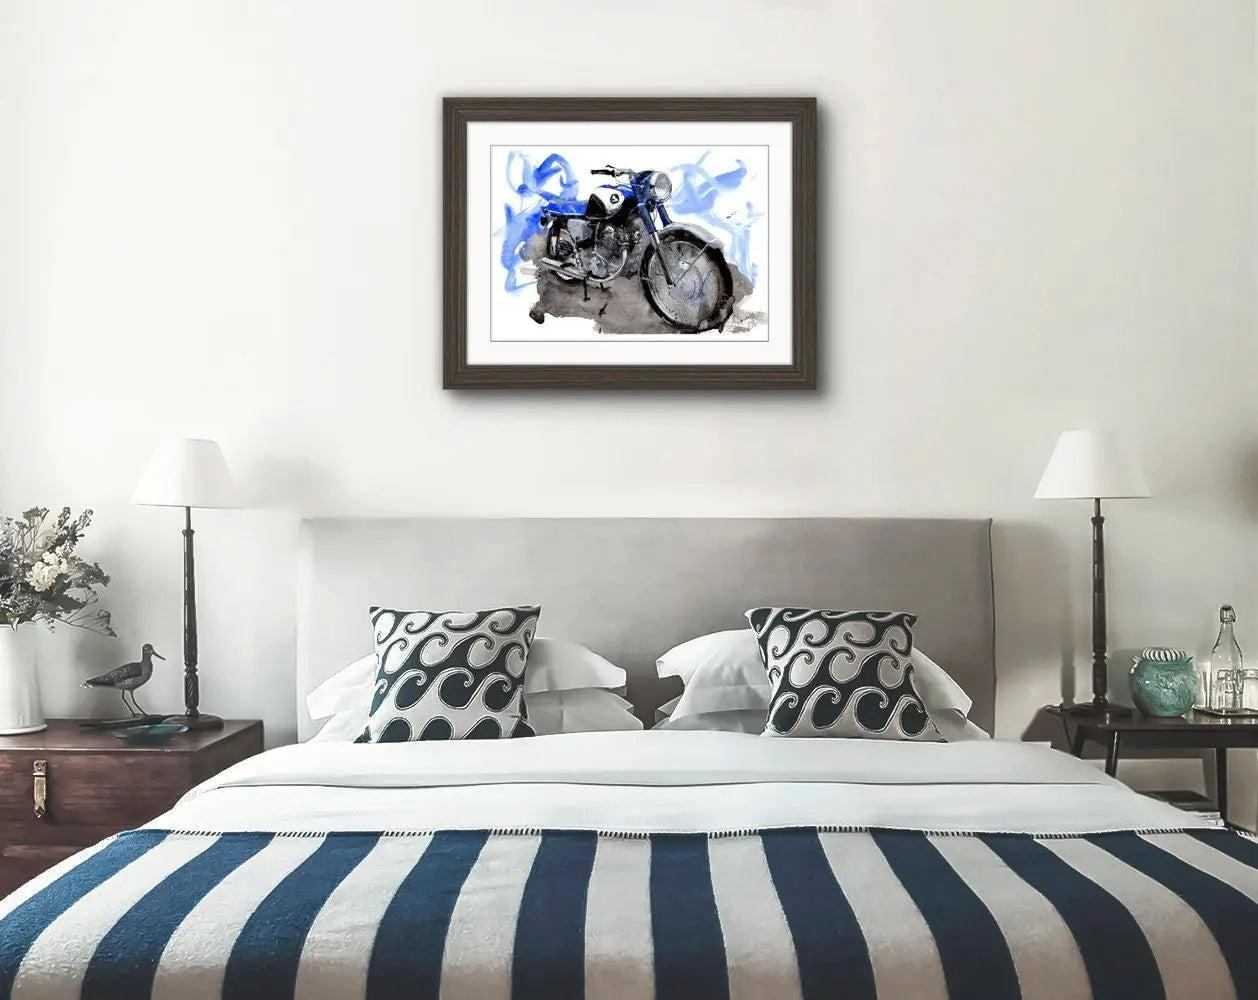 Painting of a Honda CB77 Classic Motorcycle Limited Print Bike ArtbyMyleslaurence